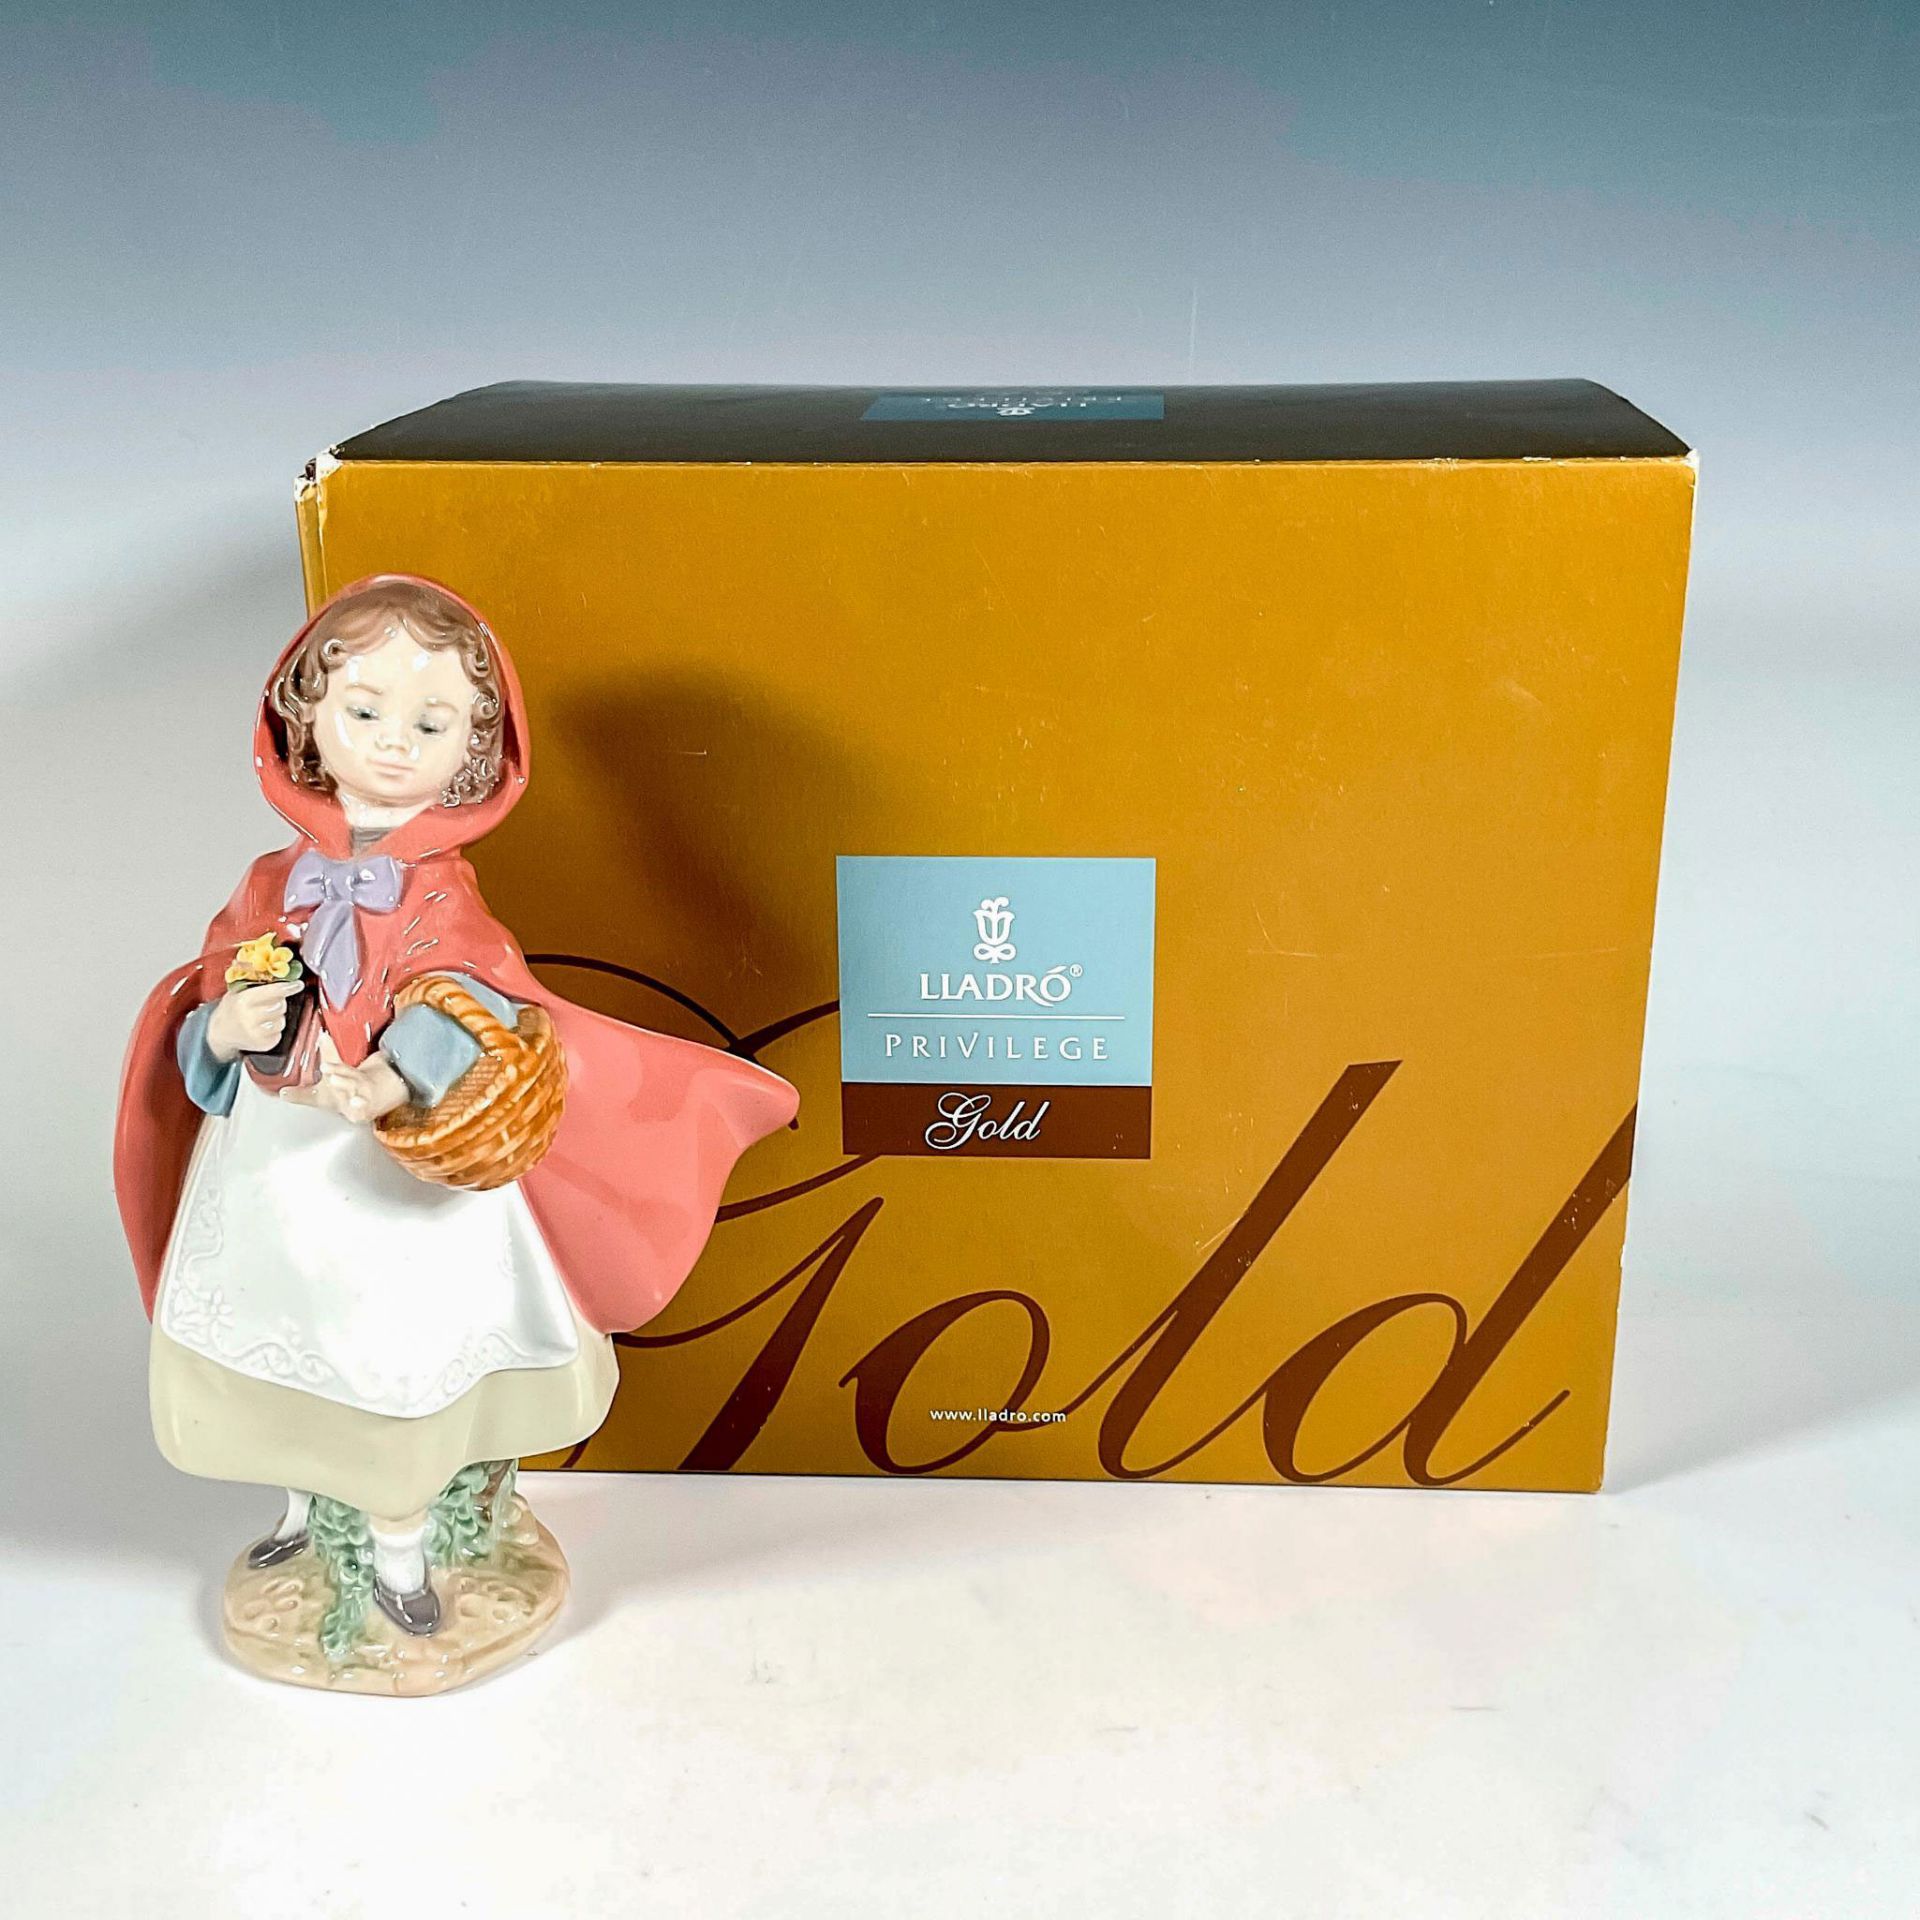 Little Red Riding Hood 1008500 - Lladro Porcelain Figurine - Image 4 of 4